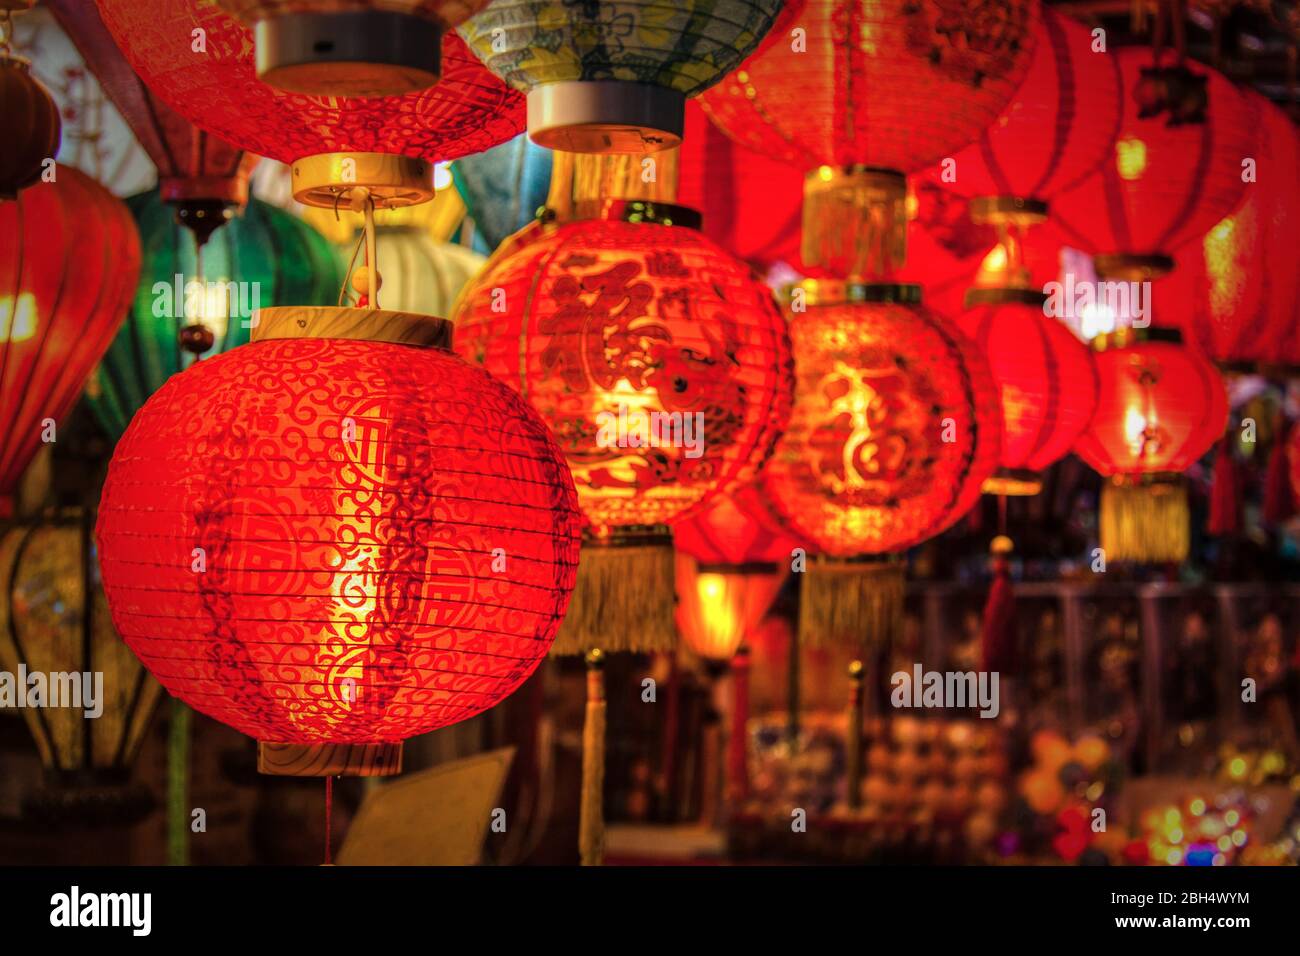 Red Chinese New Year lanterns on sale in Singapore Chinatown. These typical paper lanterns are good luck symbols, as illustrated by the Chinese charac Stock Photo